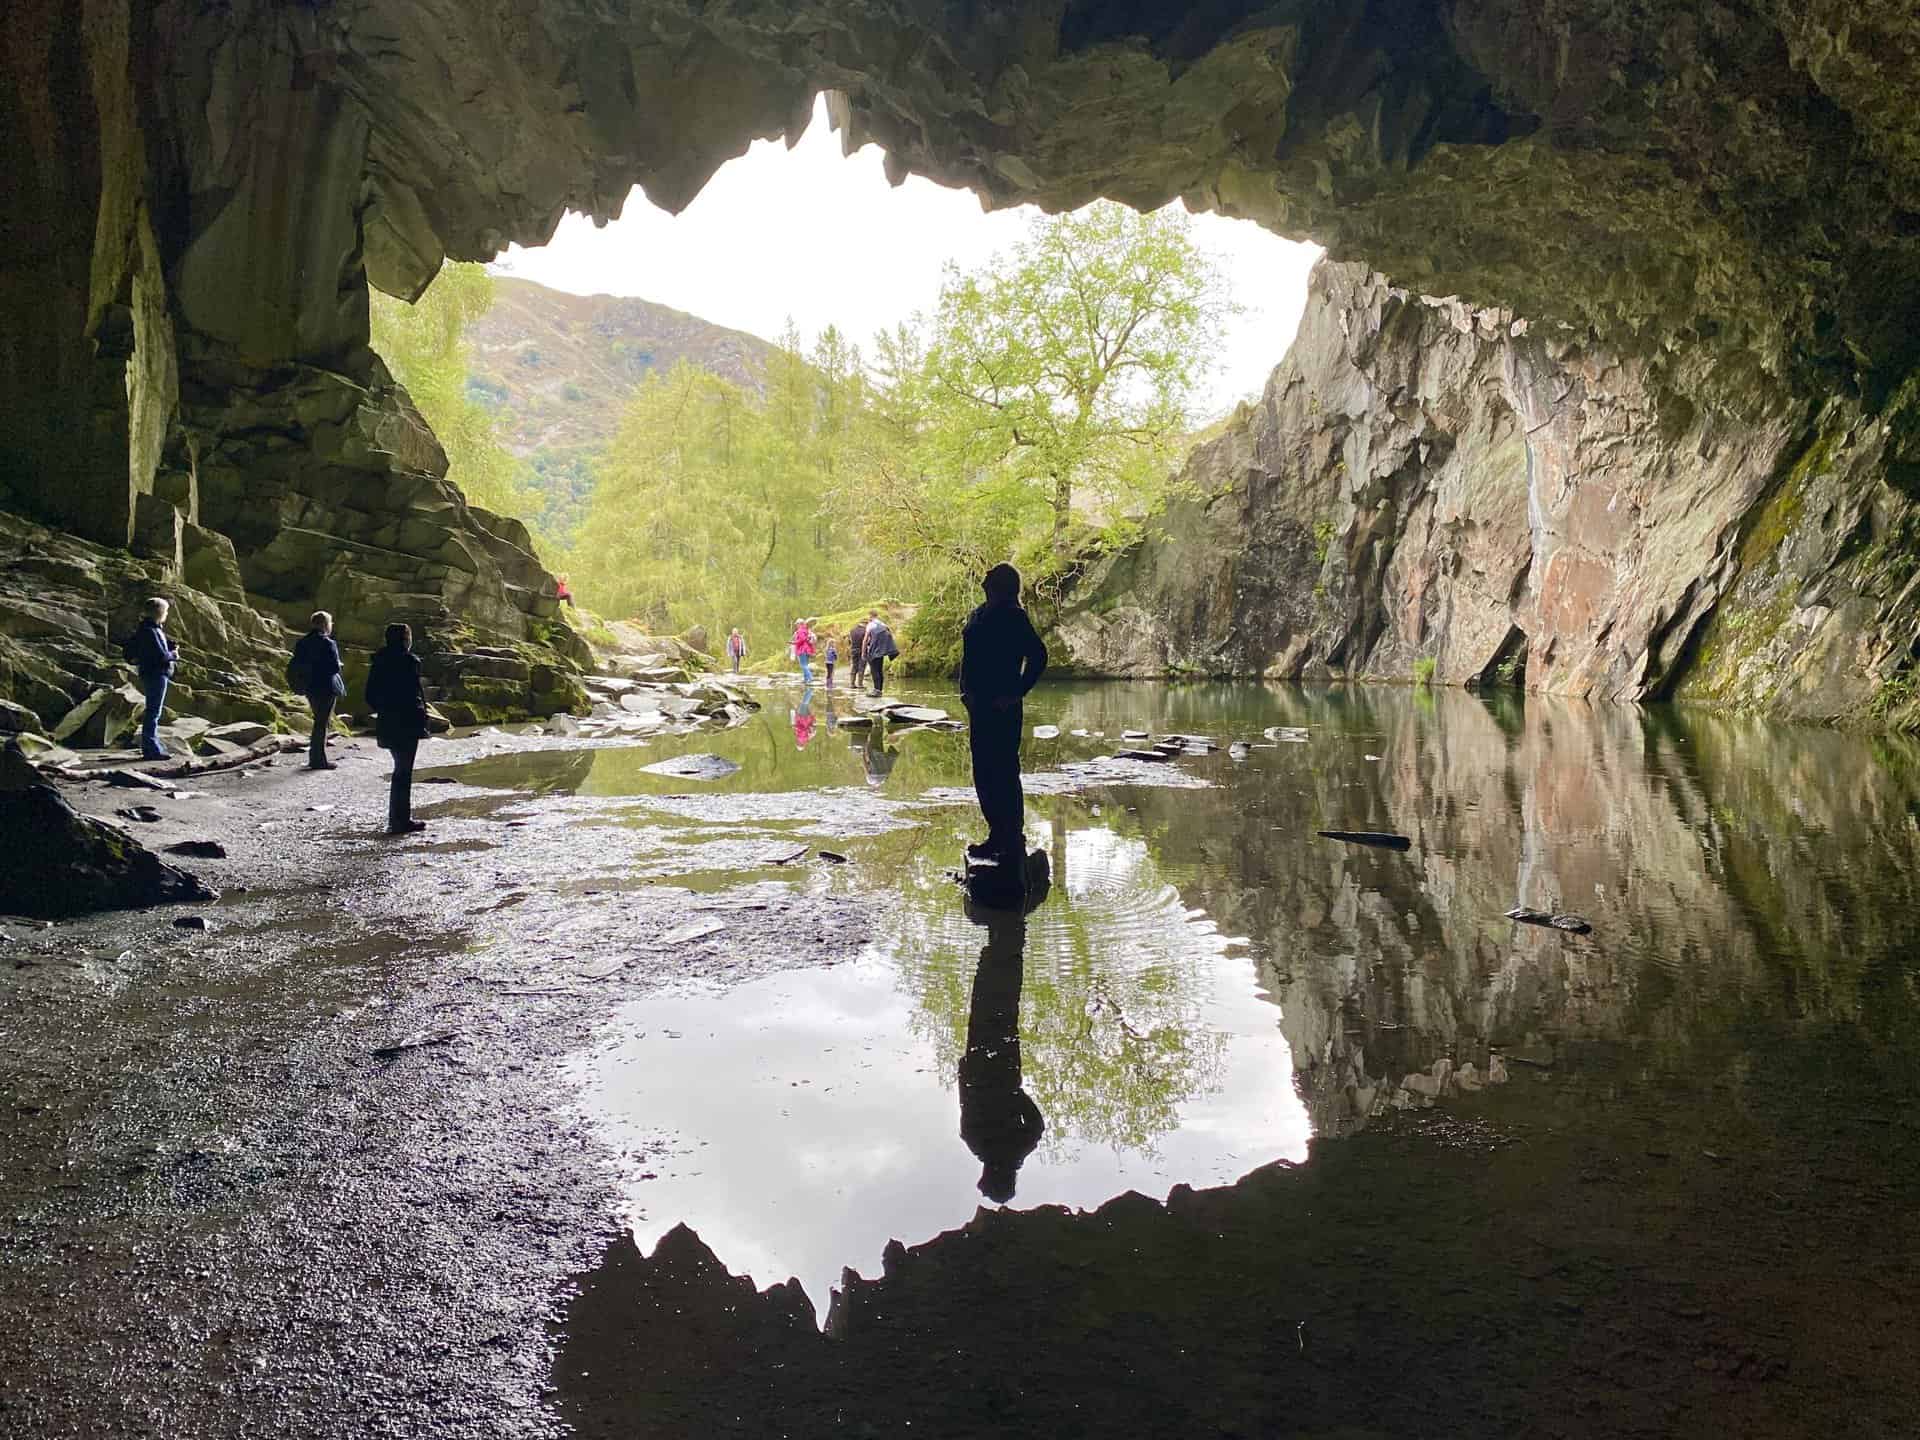 Rydal Cave. A man-made cave on the site of a former slate quarry, with stepping stones leading to a partially dry interior. Visited during our Loughrigg Fell walk in the Lake District.